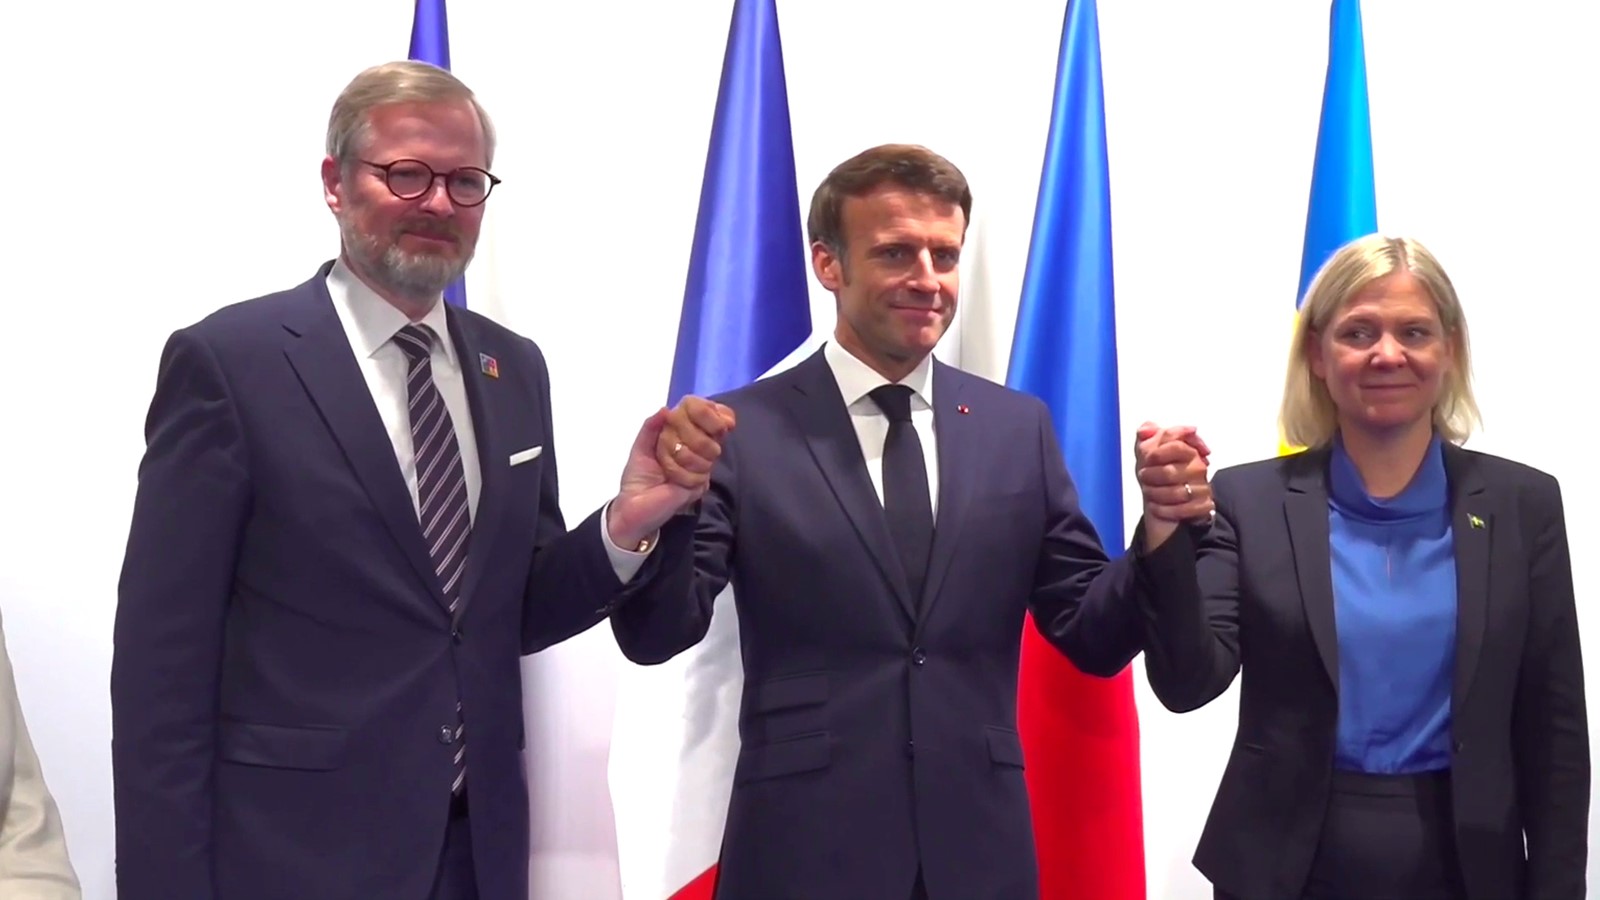 Photo: The French President with the Czech and Swedish Prime Ministers. Credit: Presidency of the French Republic